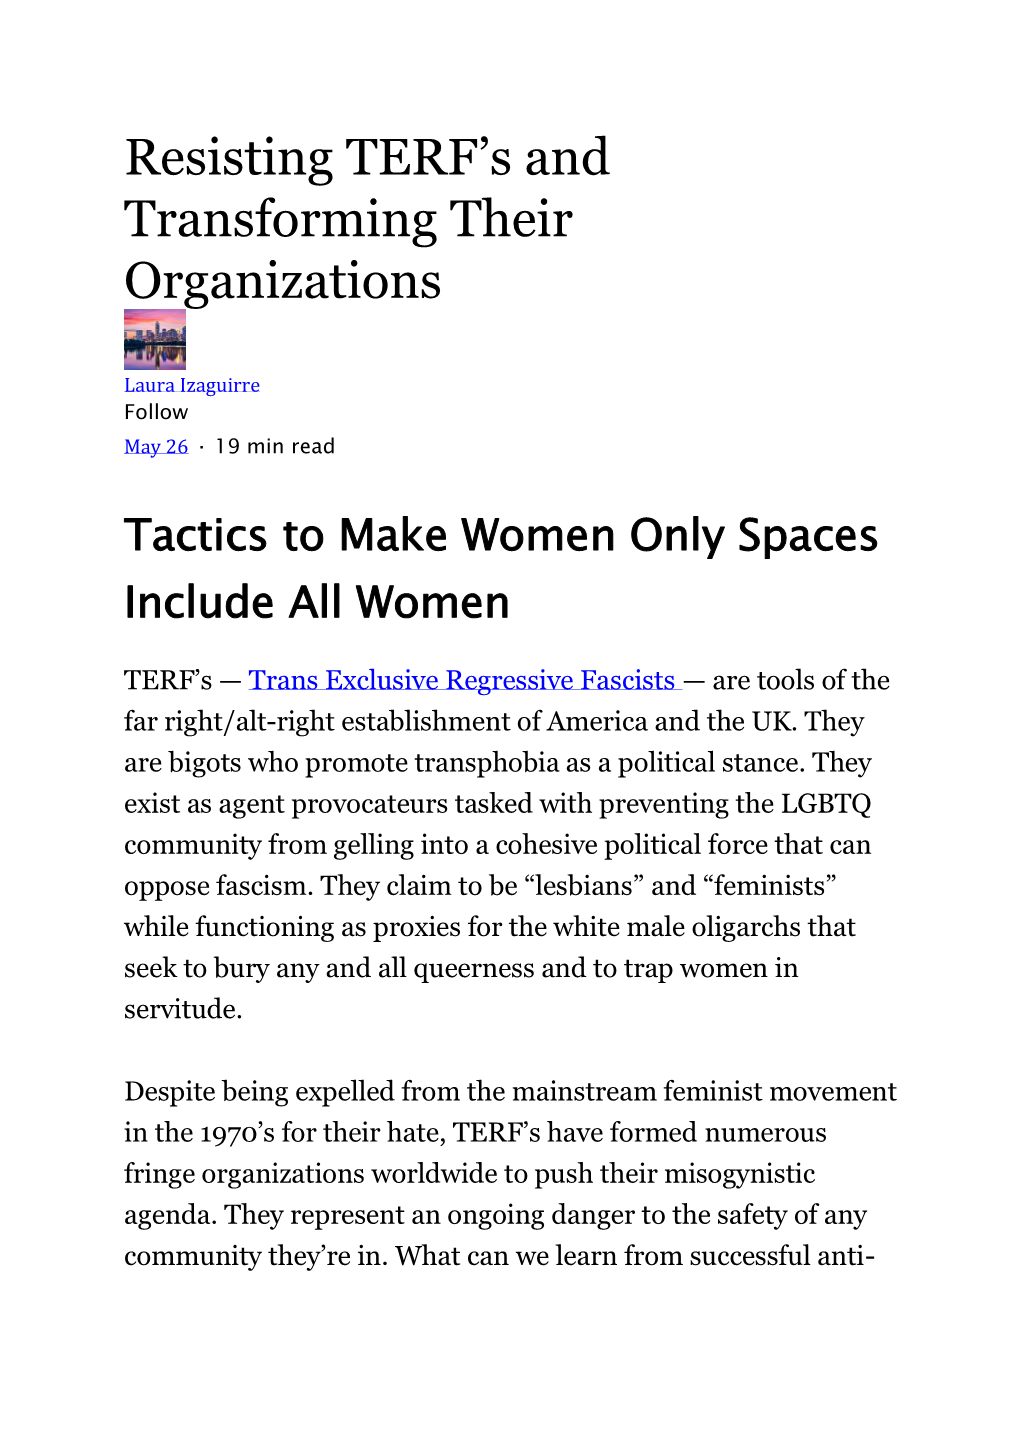 Resisting TERF's and Transforming Their Organizations